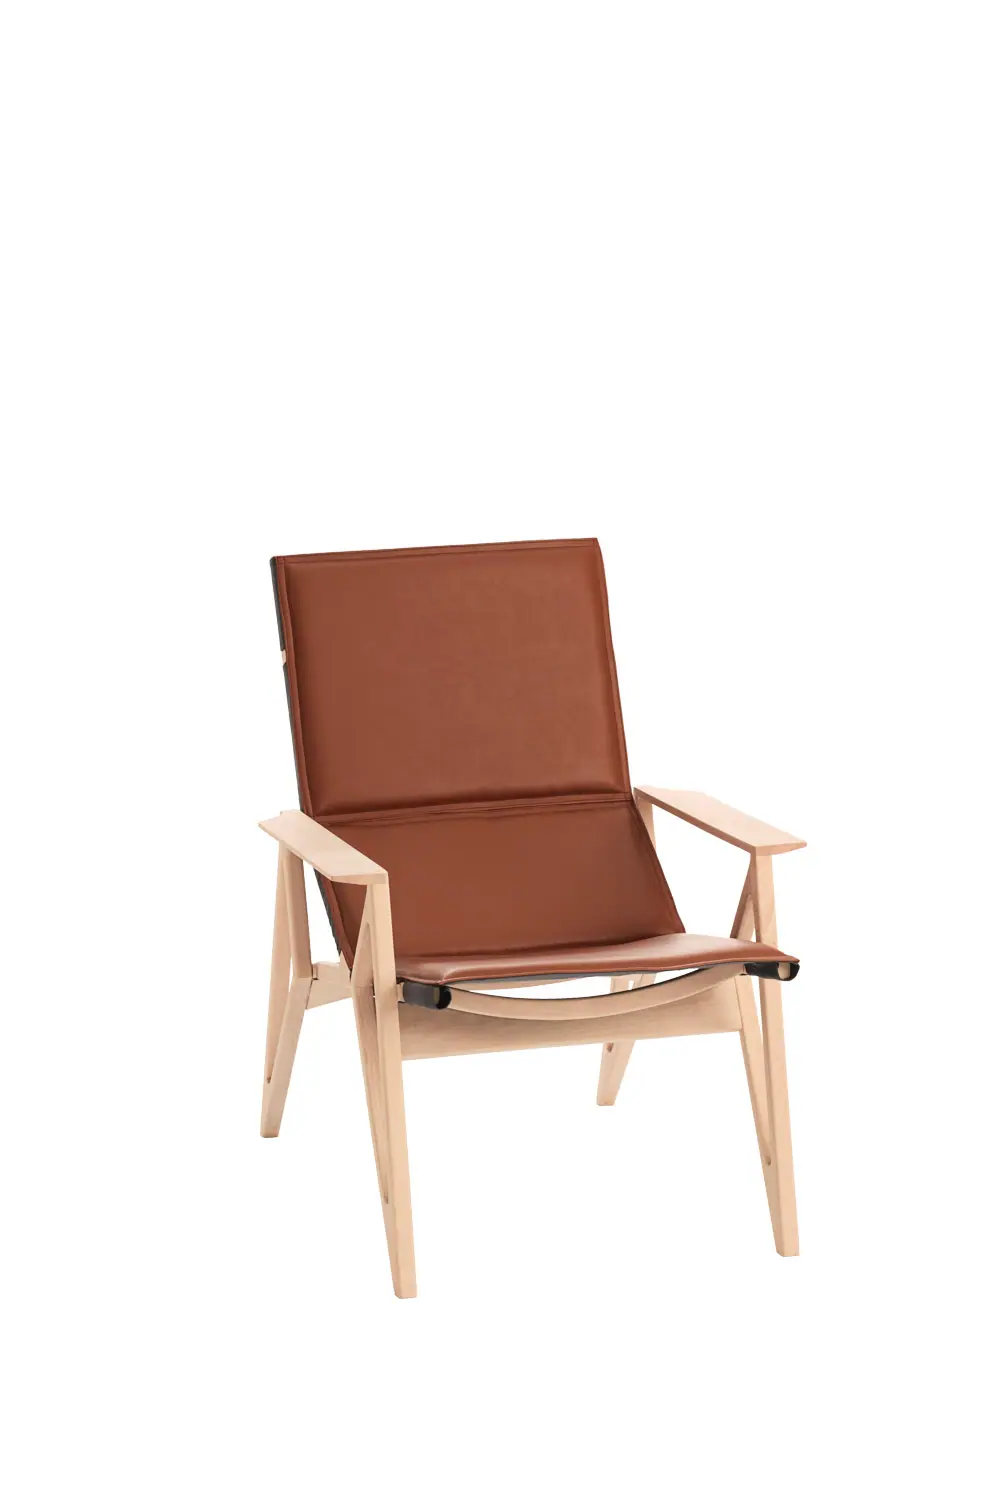 42094-42091-iconica-chair